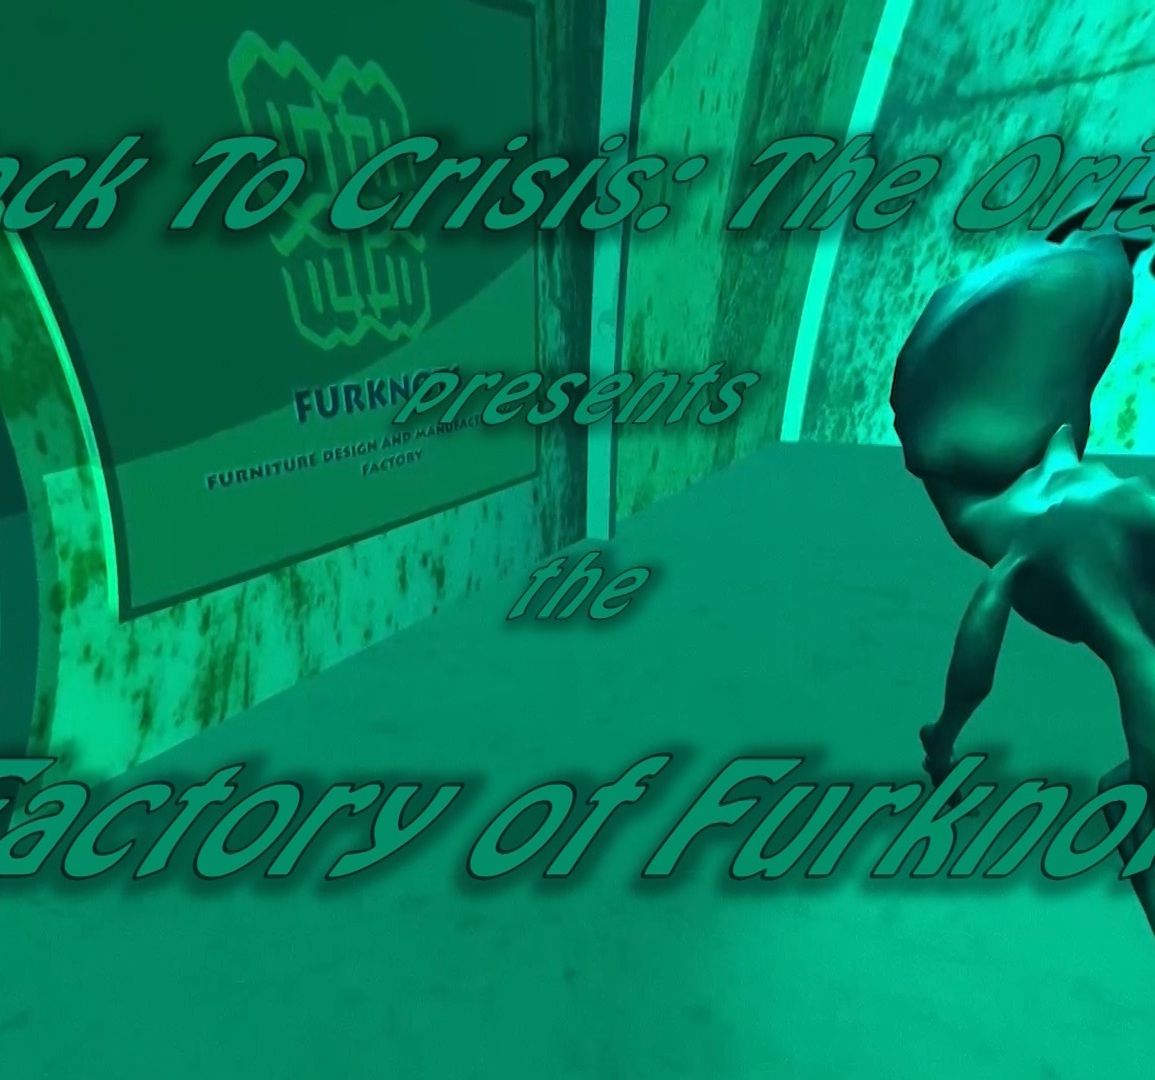 Image with a 3d alien reads "Back to Crisis: The Origin presents Factory of Furknots"